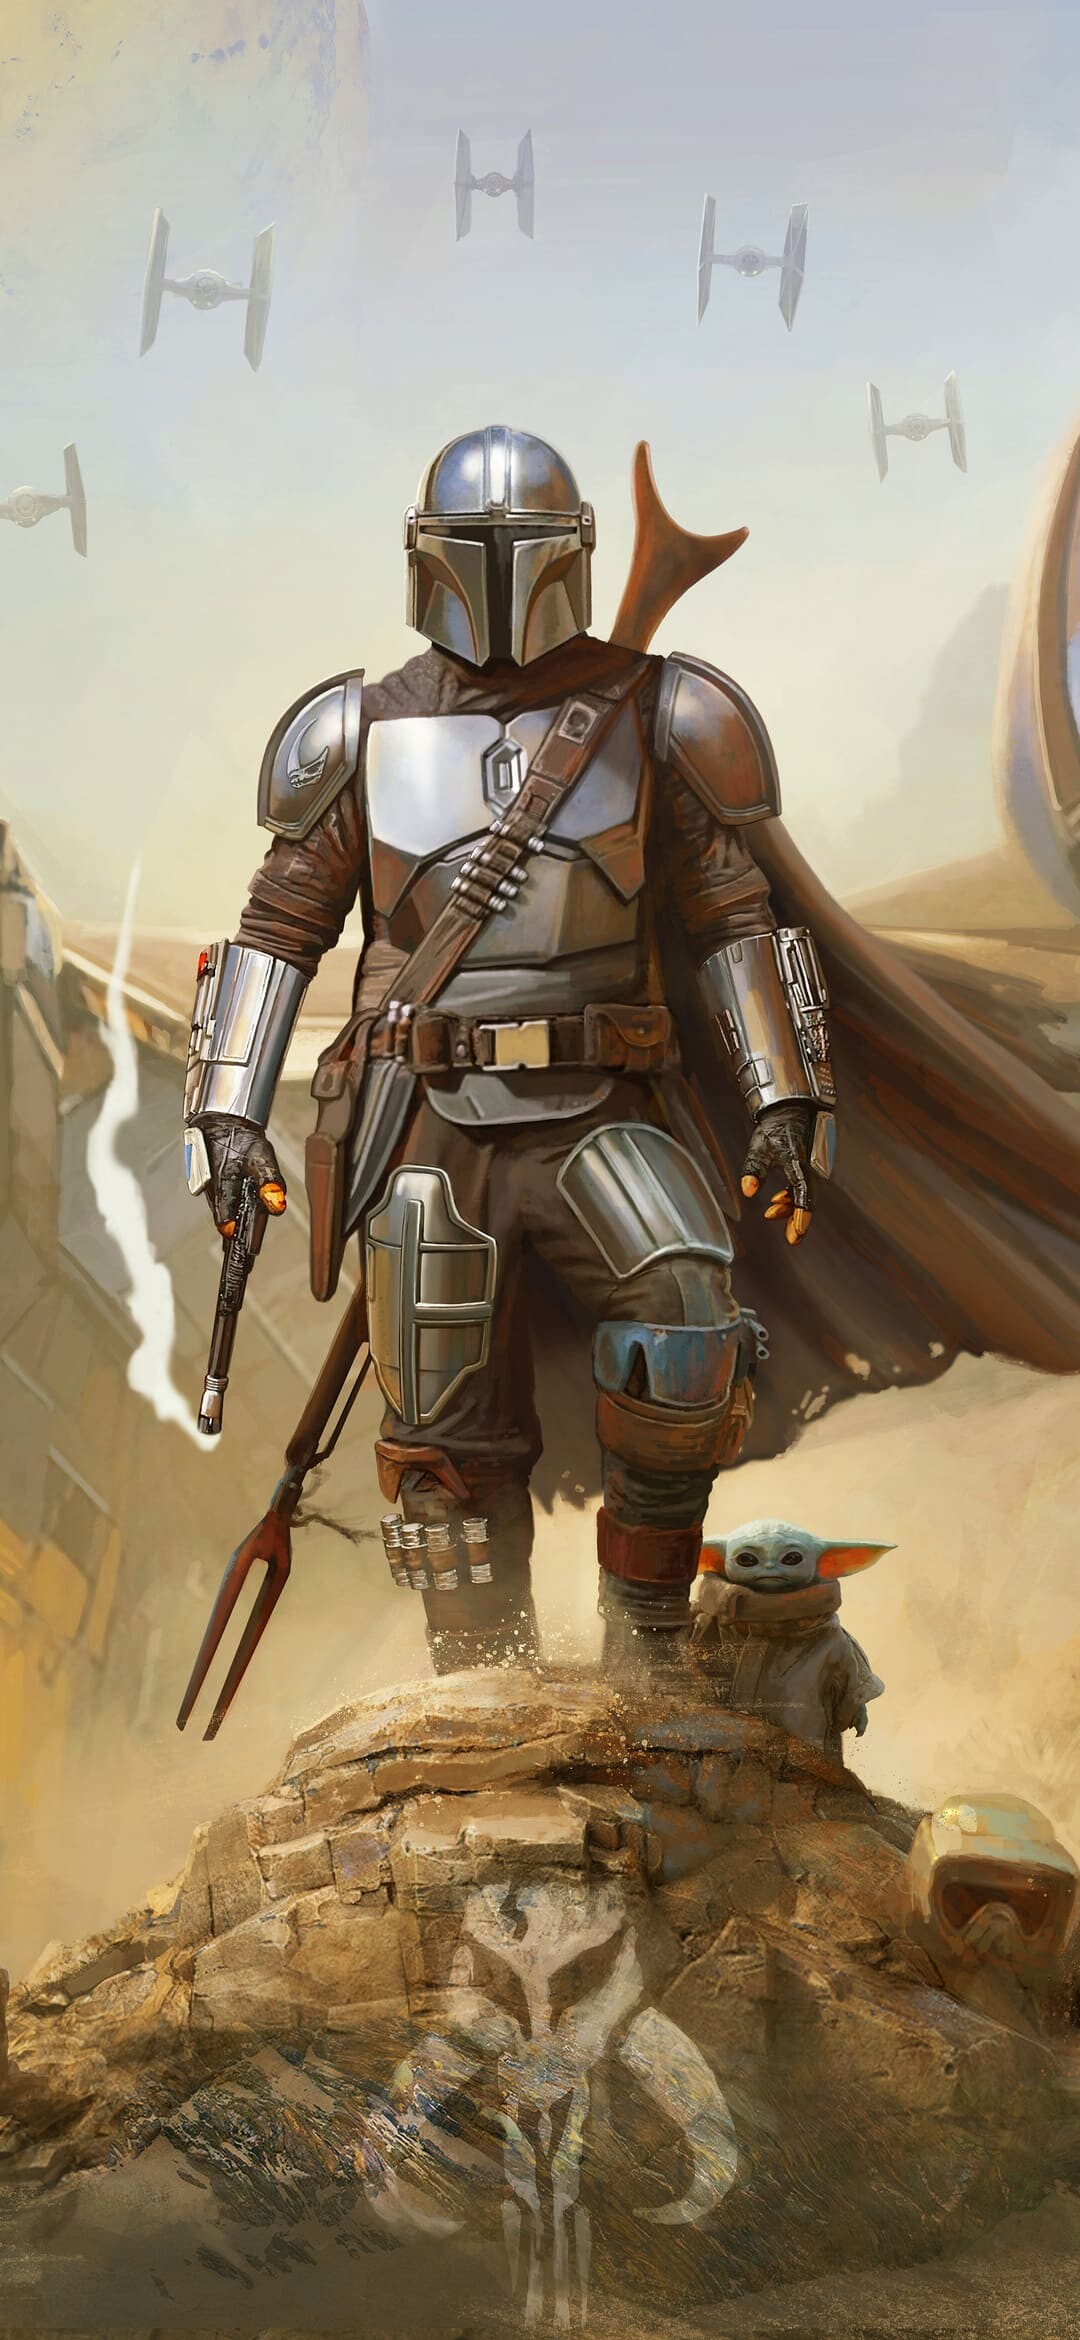 The Mandalorian: A lone mysterious gunfighter plies his trade deep in the galaxy’s outer reaches far from the activity of the New Republic. 1080x2340 HD Wallpaper.